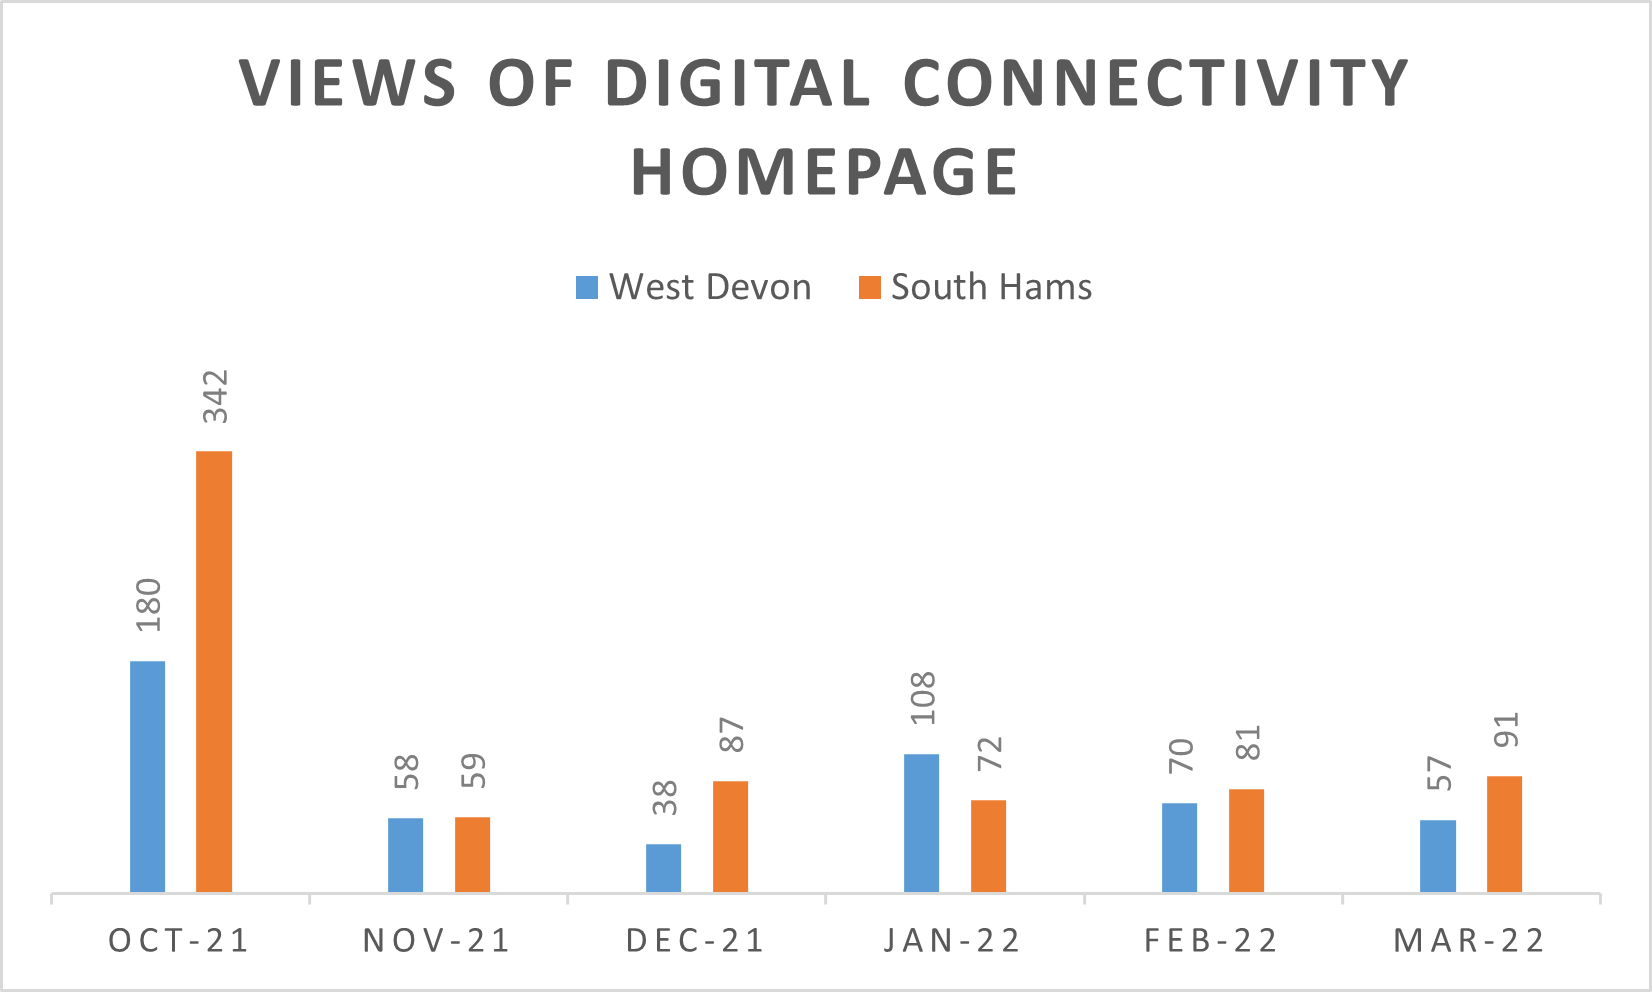 Graph of number of views of digital connectivity homepage for South Hams and West Devon over six-month period. Views in October 2021, the first month, were 342 for South Hams and 180 for West Devon. In November 2021, 59 for South Hams and 58 for West Devon. In December 2021, 87 for South Hams and 38 for West Devon. In January, 72 for South Hams, and 108 for West Devon. In February, 81 for South Hams and 70 for West Devon. In March 2022, 91 for South Hams and 57 for West Devon.